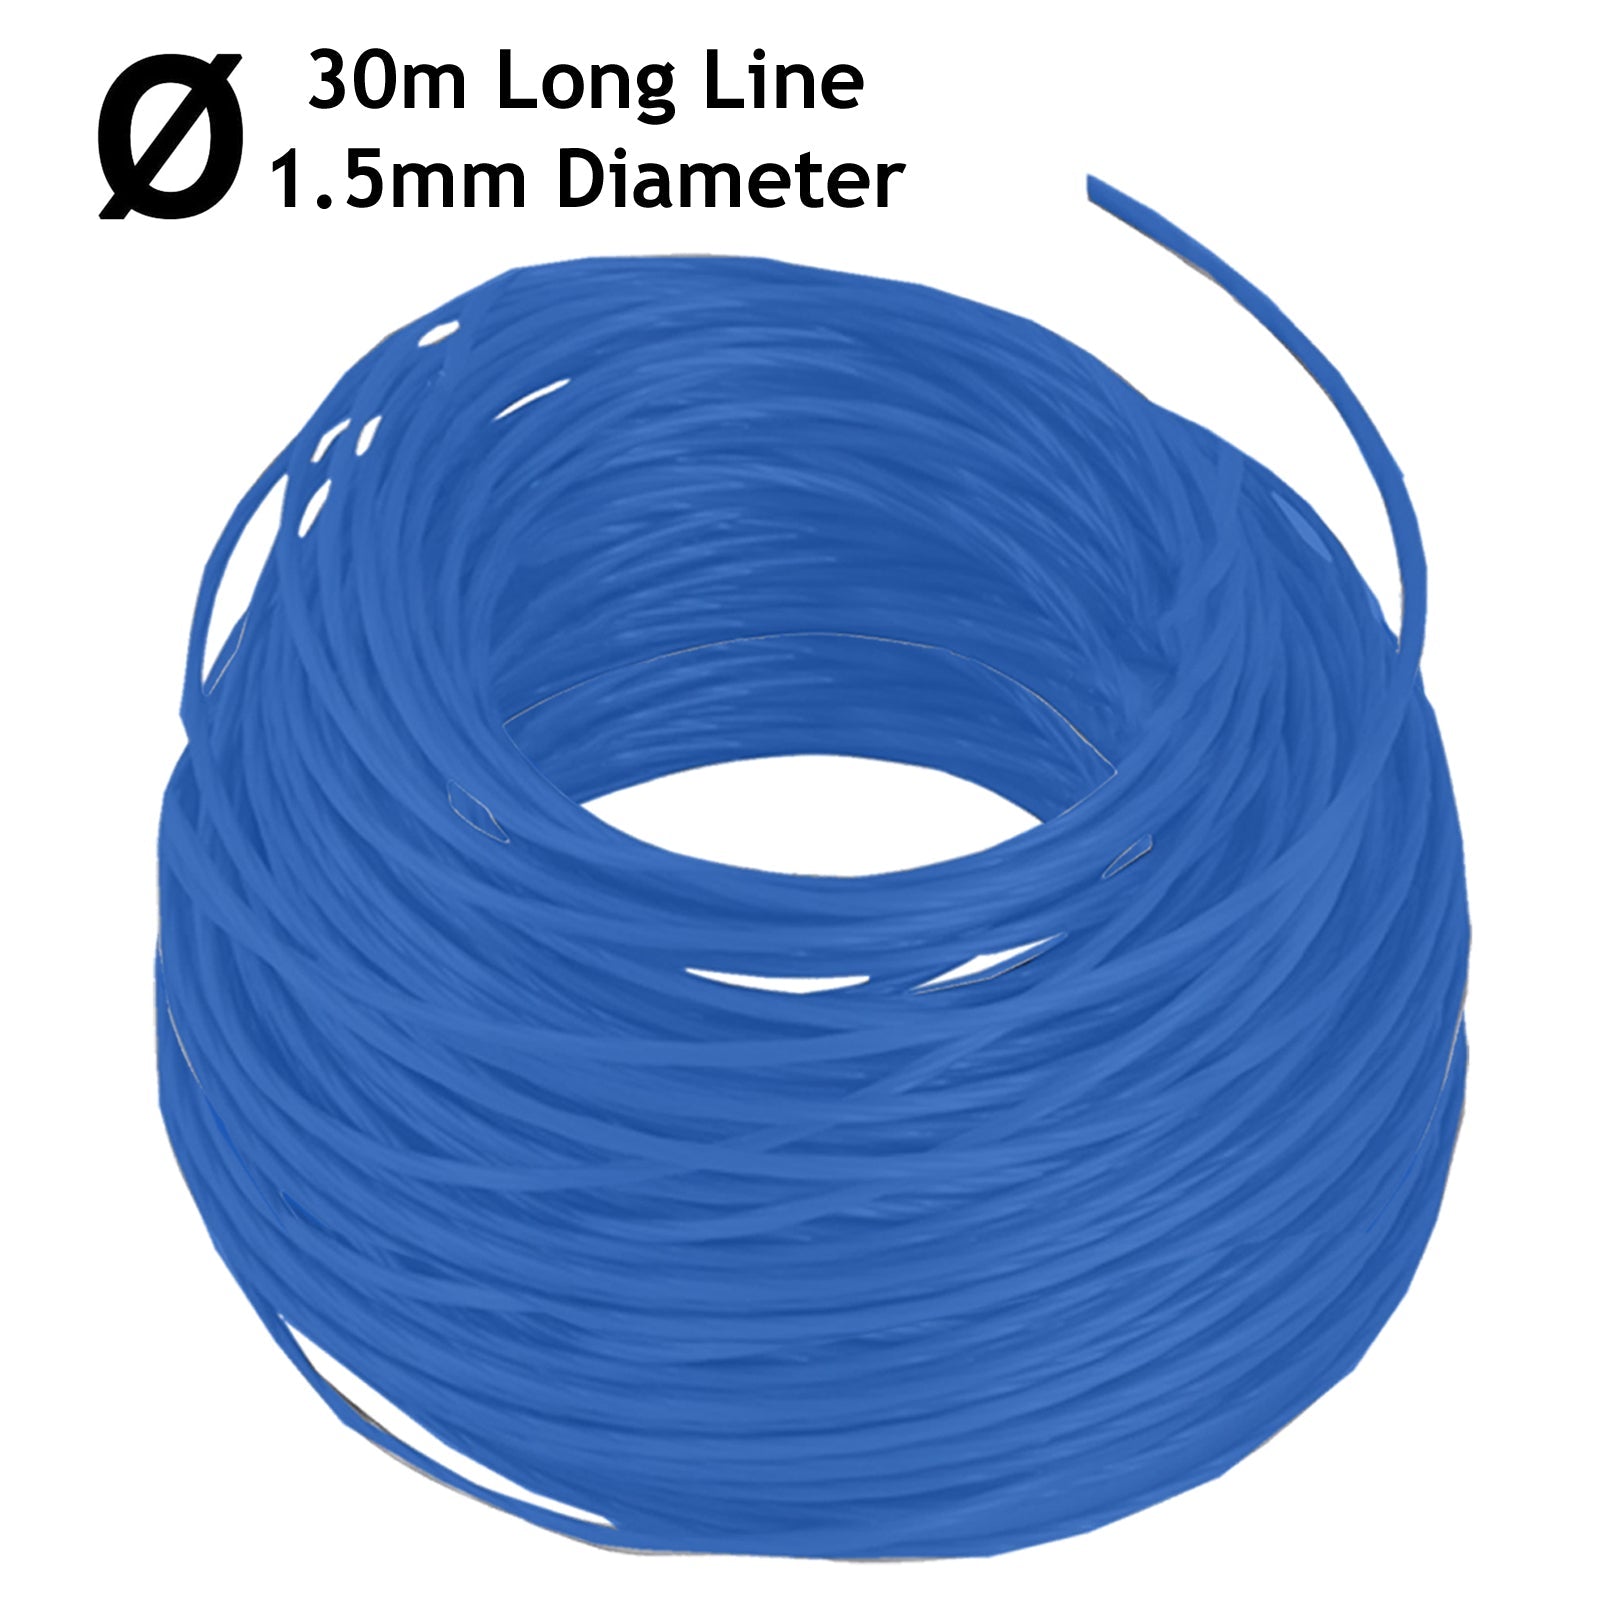 Trimmer Strimmer Line Spool Refill Cord 30m x 1.5mm Universal Blue Auto-Feed